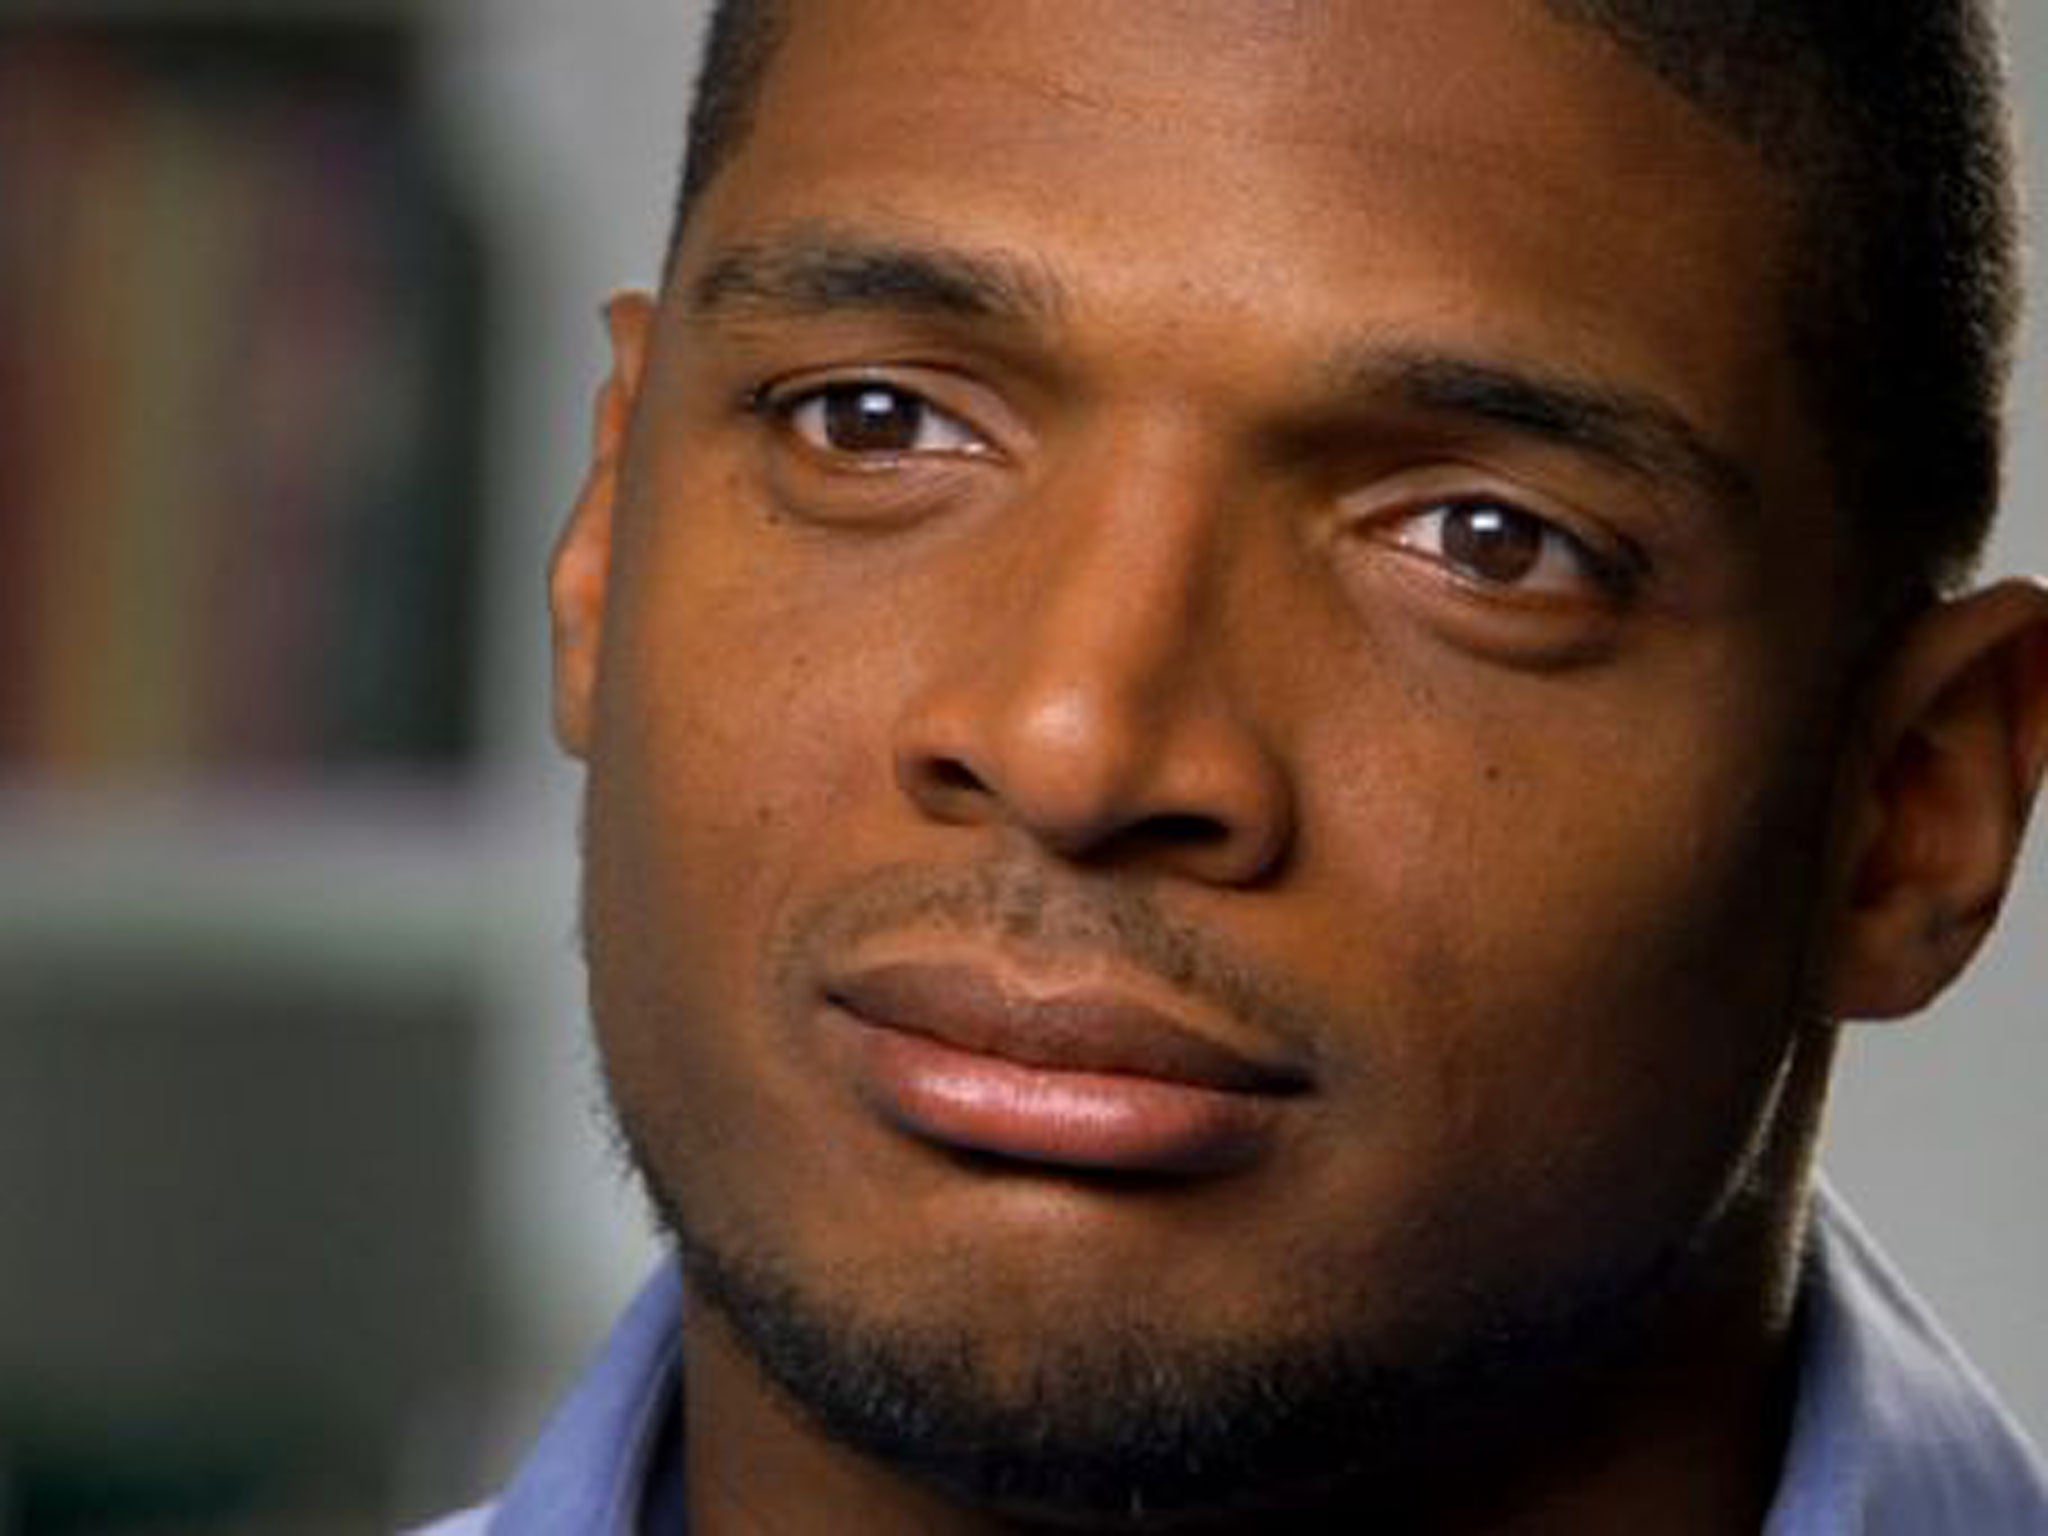 Michael Sam, the NFL's first openly gay player, has been cut